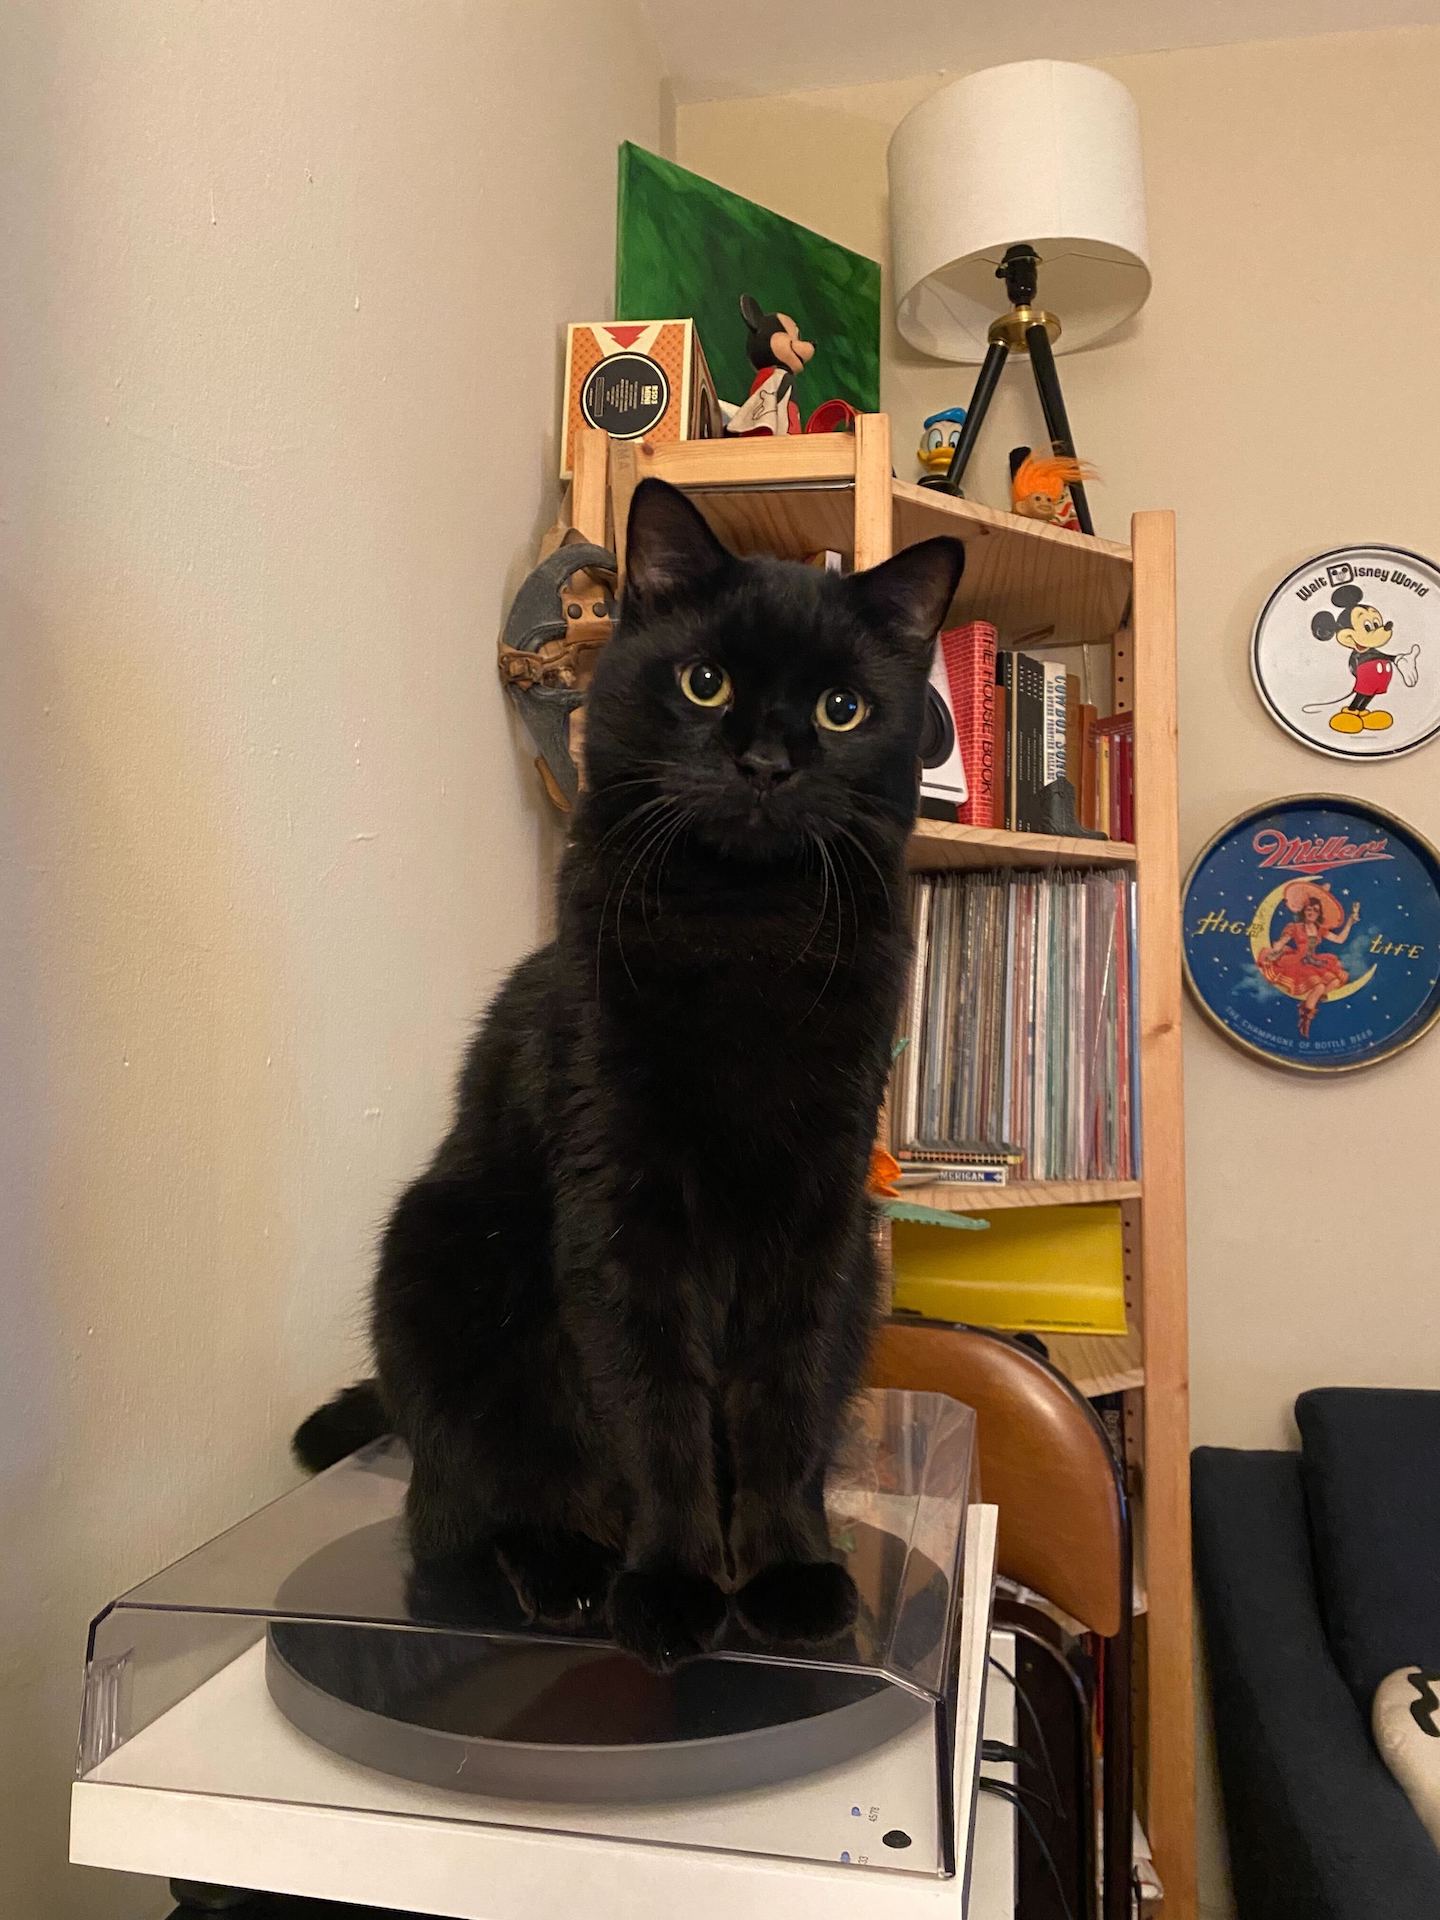 [Image description: Henry Molloy (a cat) seated on top of a turntable]